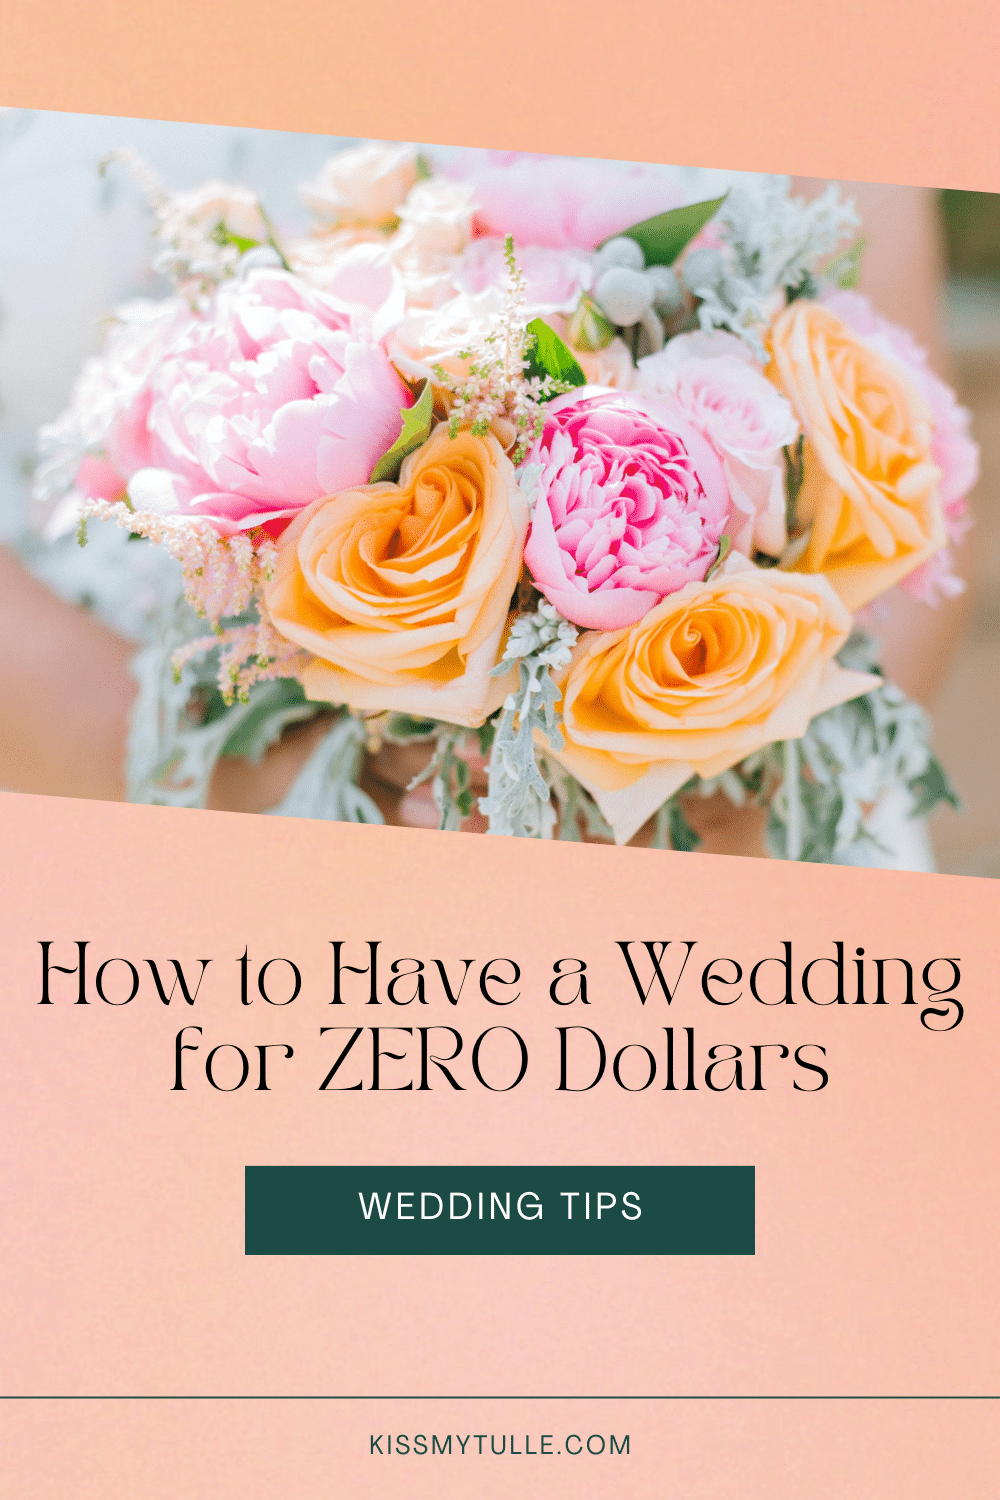 Yes! You can have a wedding for ZERO DOLLARS. Let Alaskan blogger, Kiss My Tulle, show you how you can have a Big Day that costs you nothing.